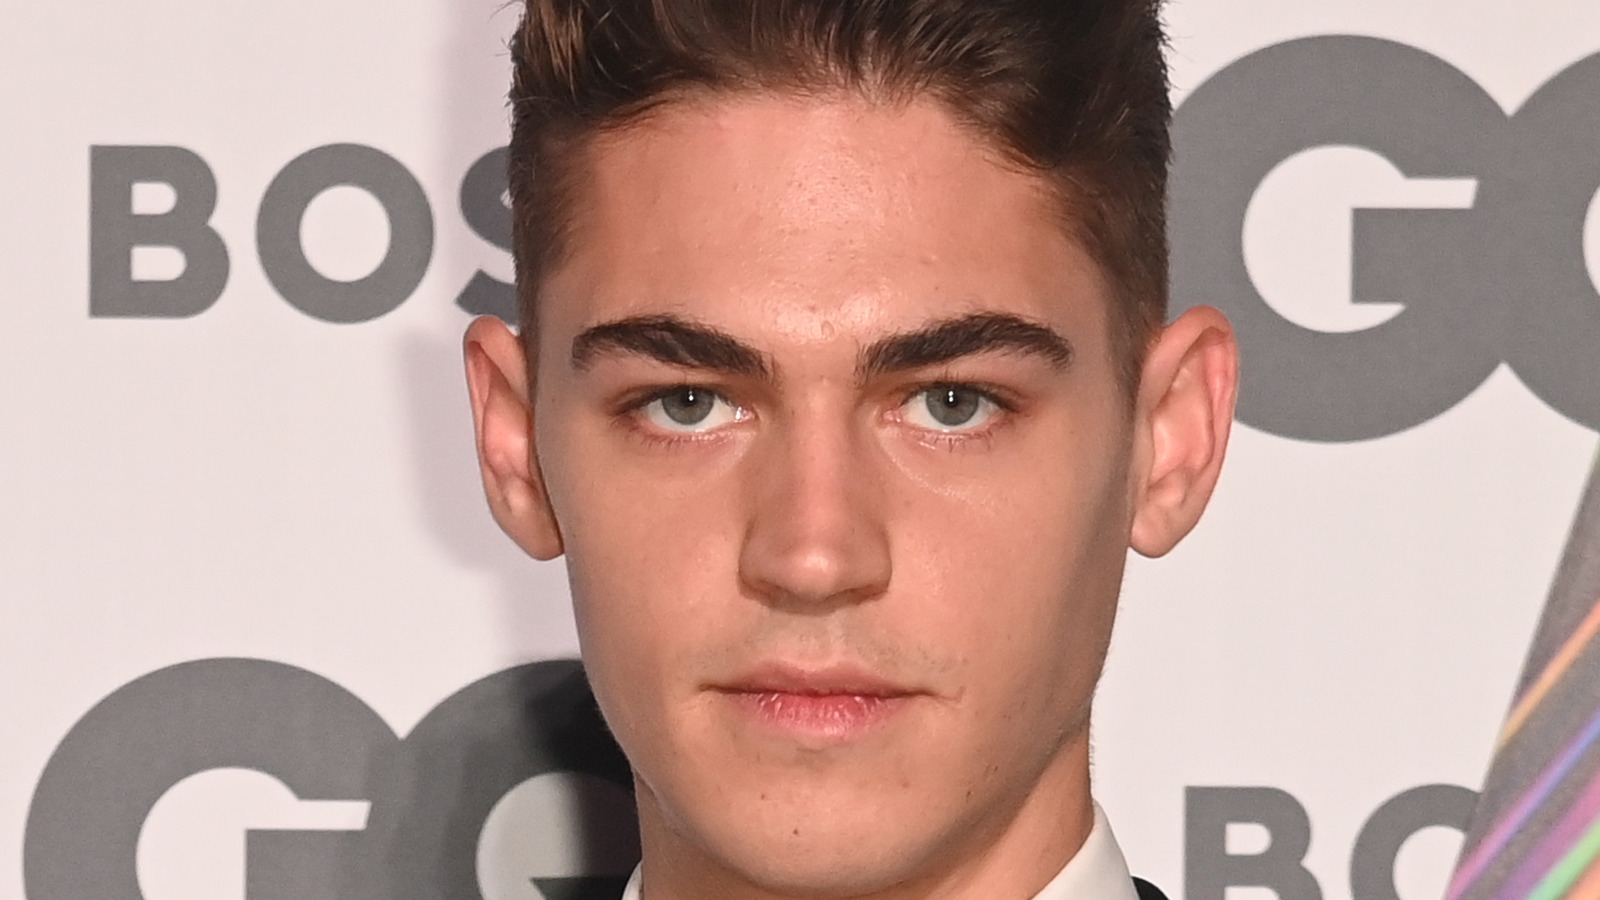 Hero Fiennes Tiffin On New Movie First Love Harry Potter Memories And More Exclusive